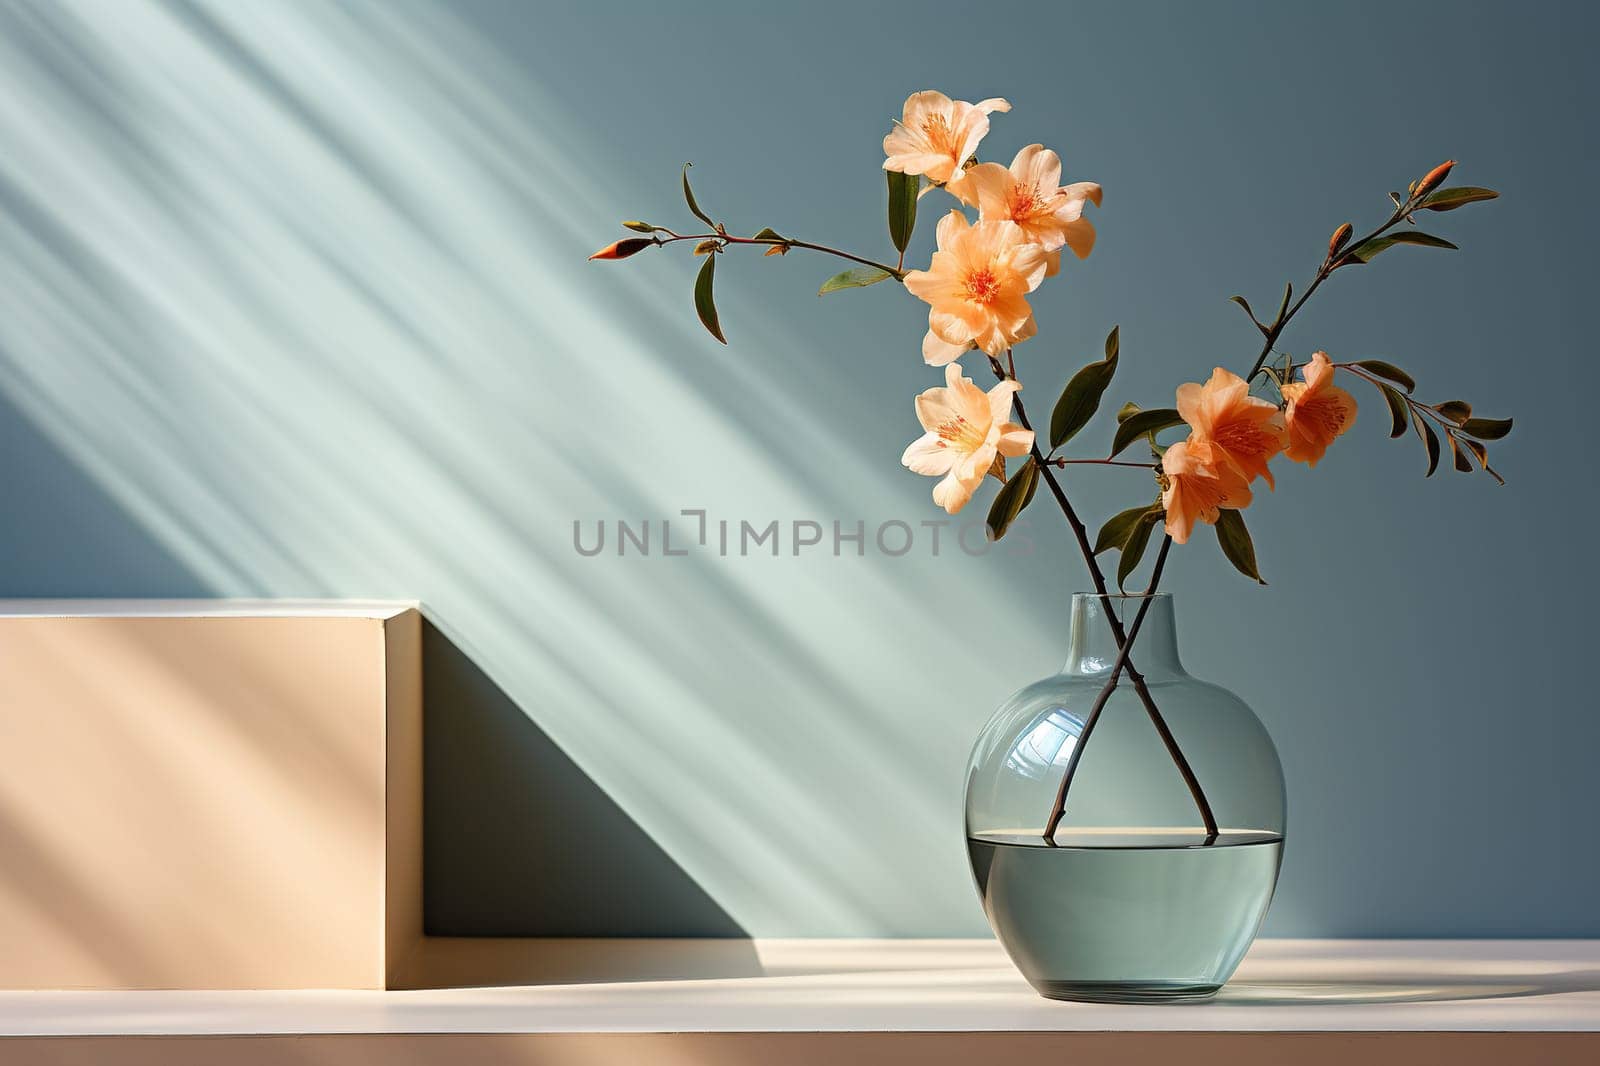 Glass vase with flowers on the table, minimalism. Shadows on the wall.